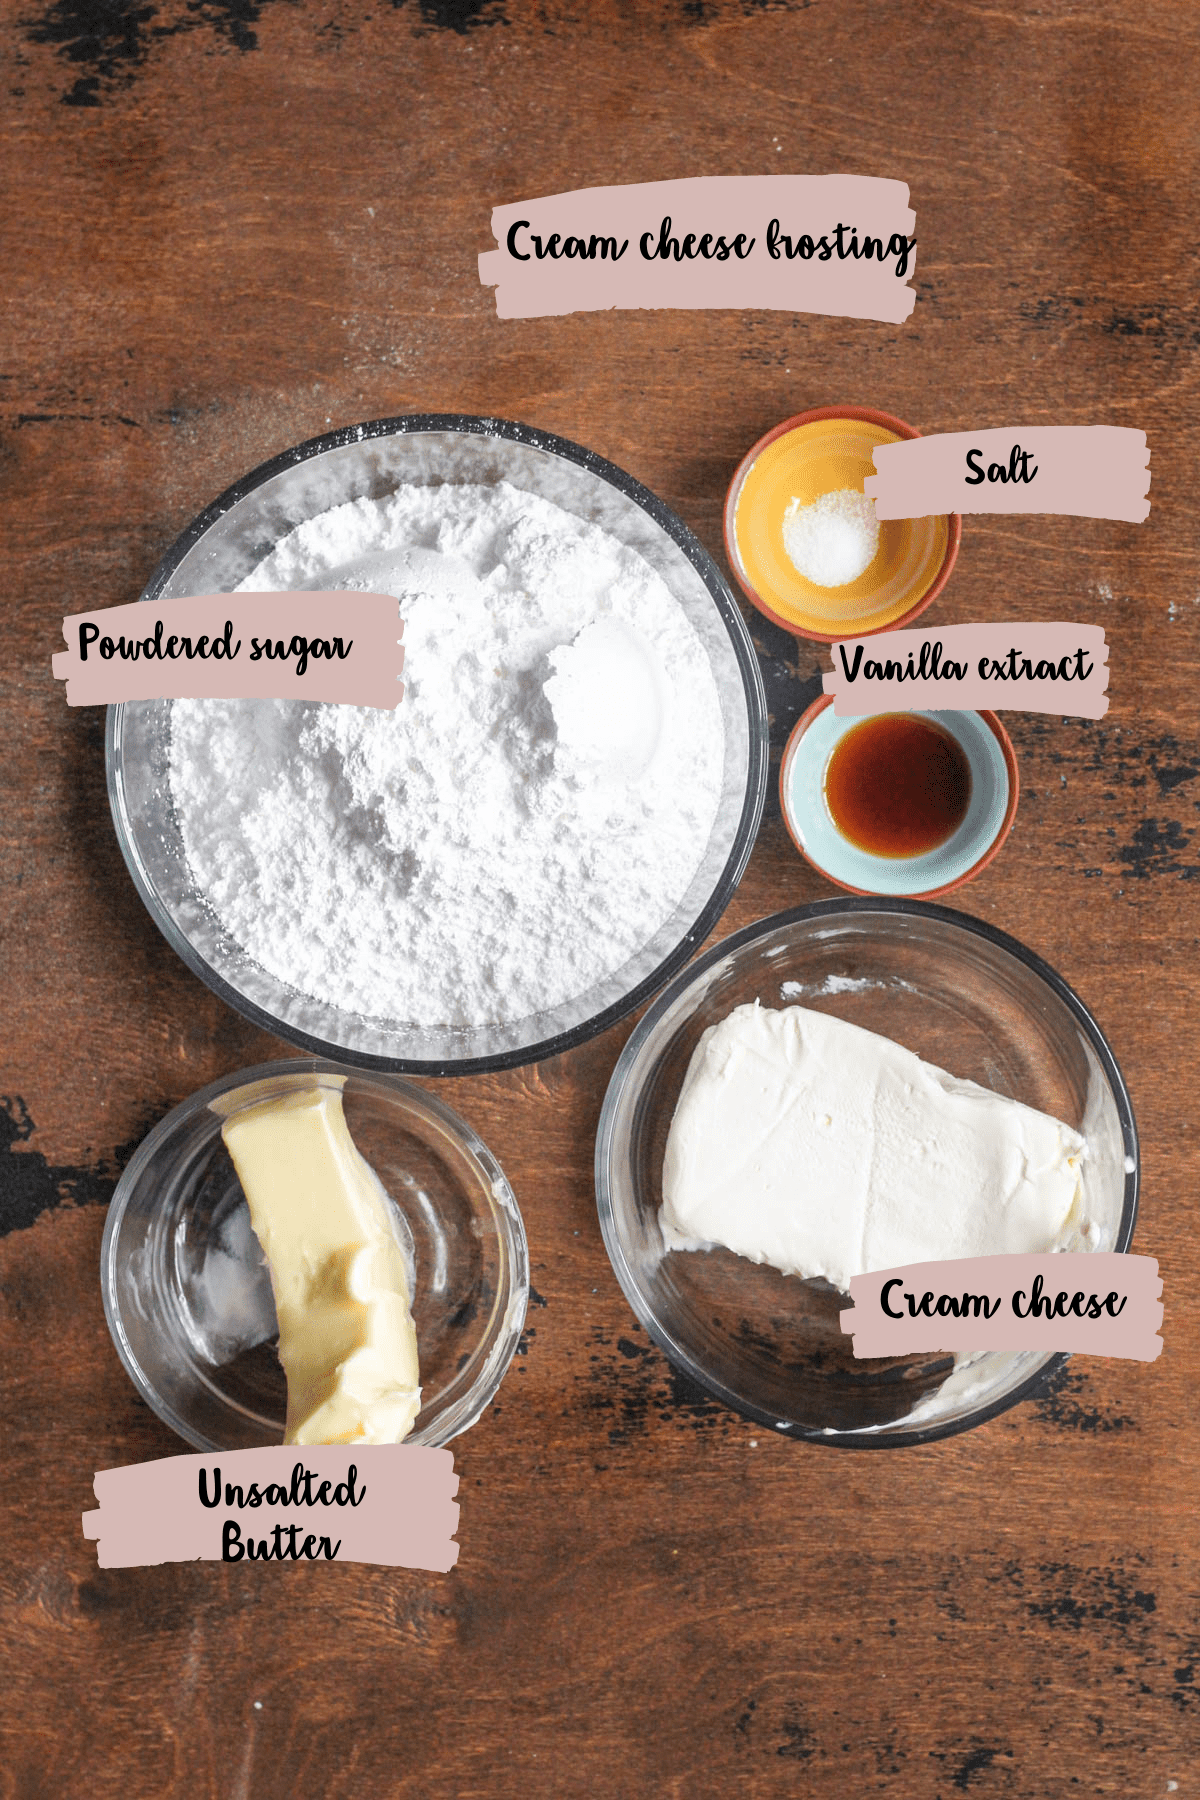 Measured ingredients to make cream cheese frosting. 